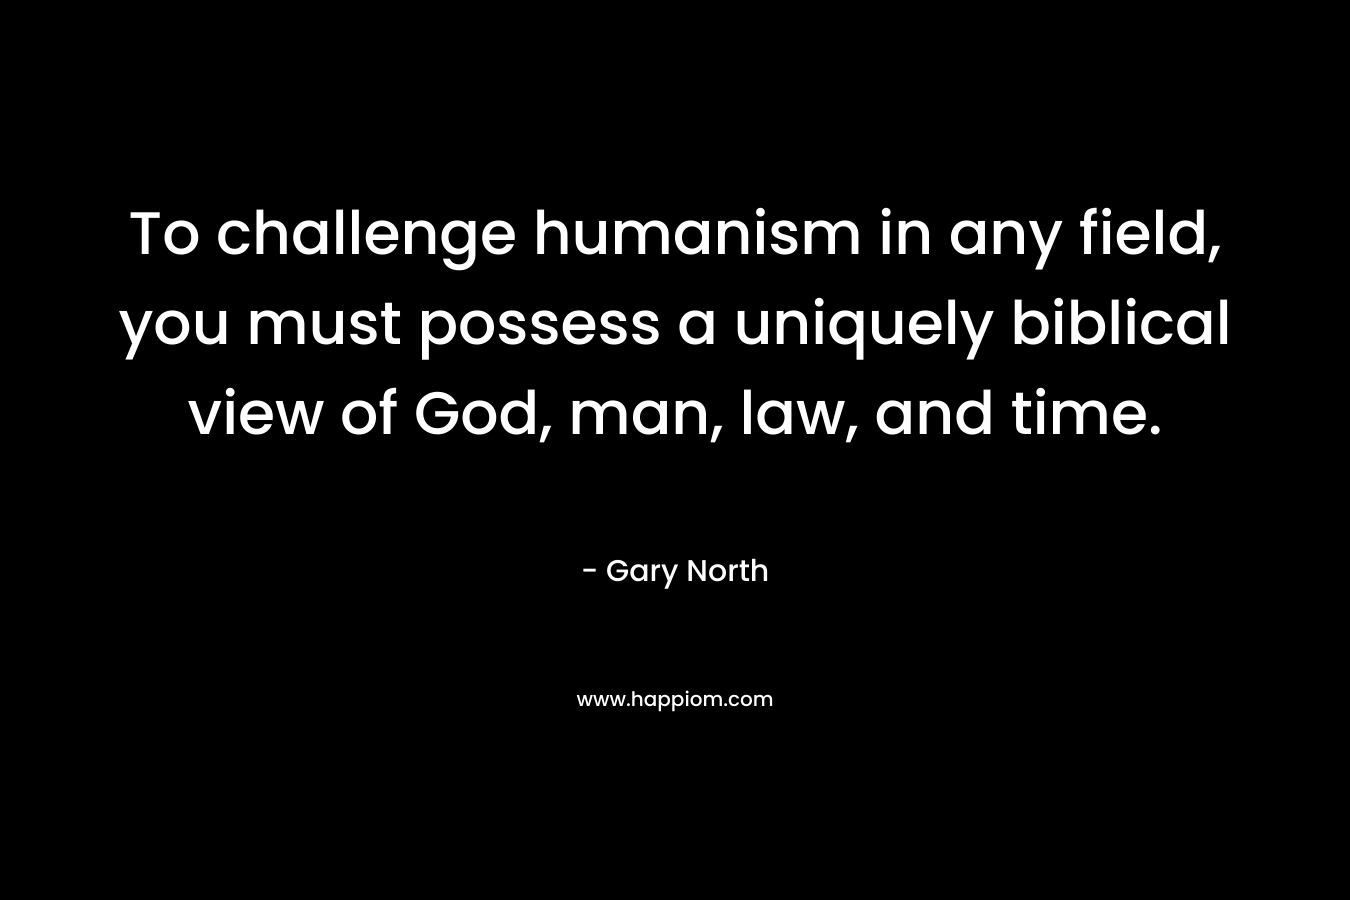 To challenge humanism in any field, you must possess a uniquely biblical view of God, man, law, and time. – Gary North